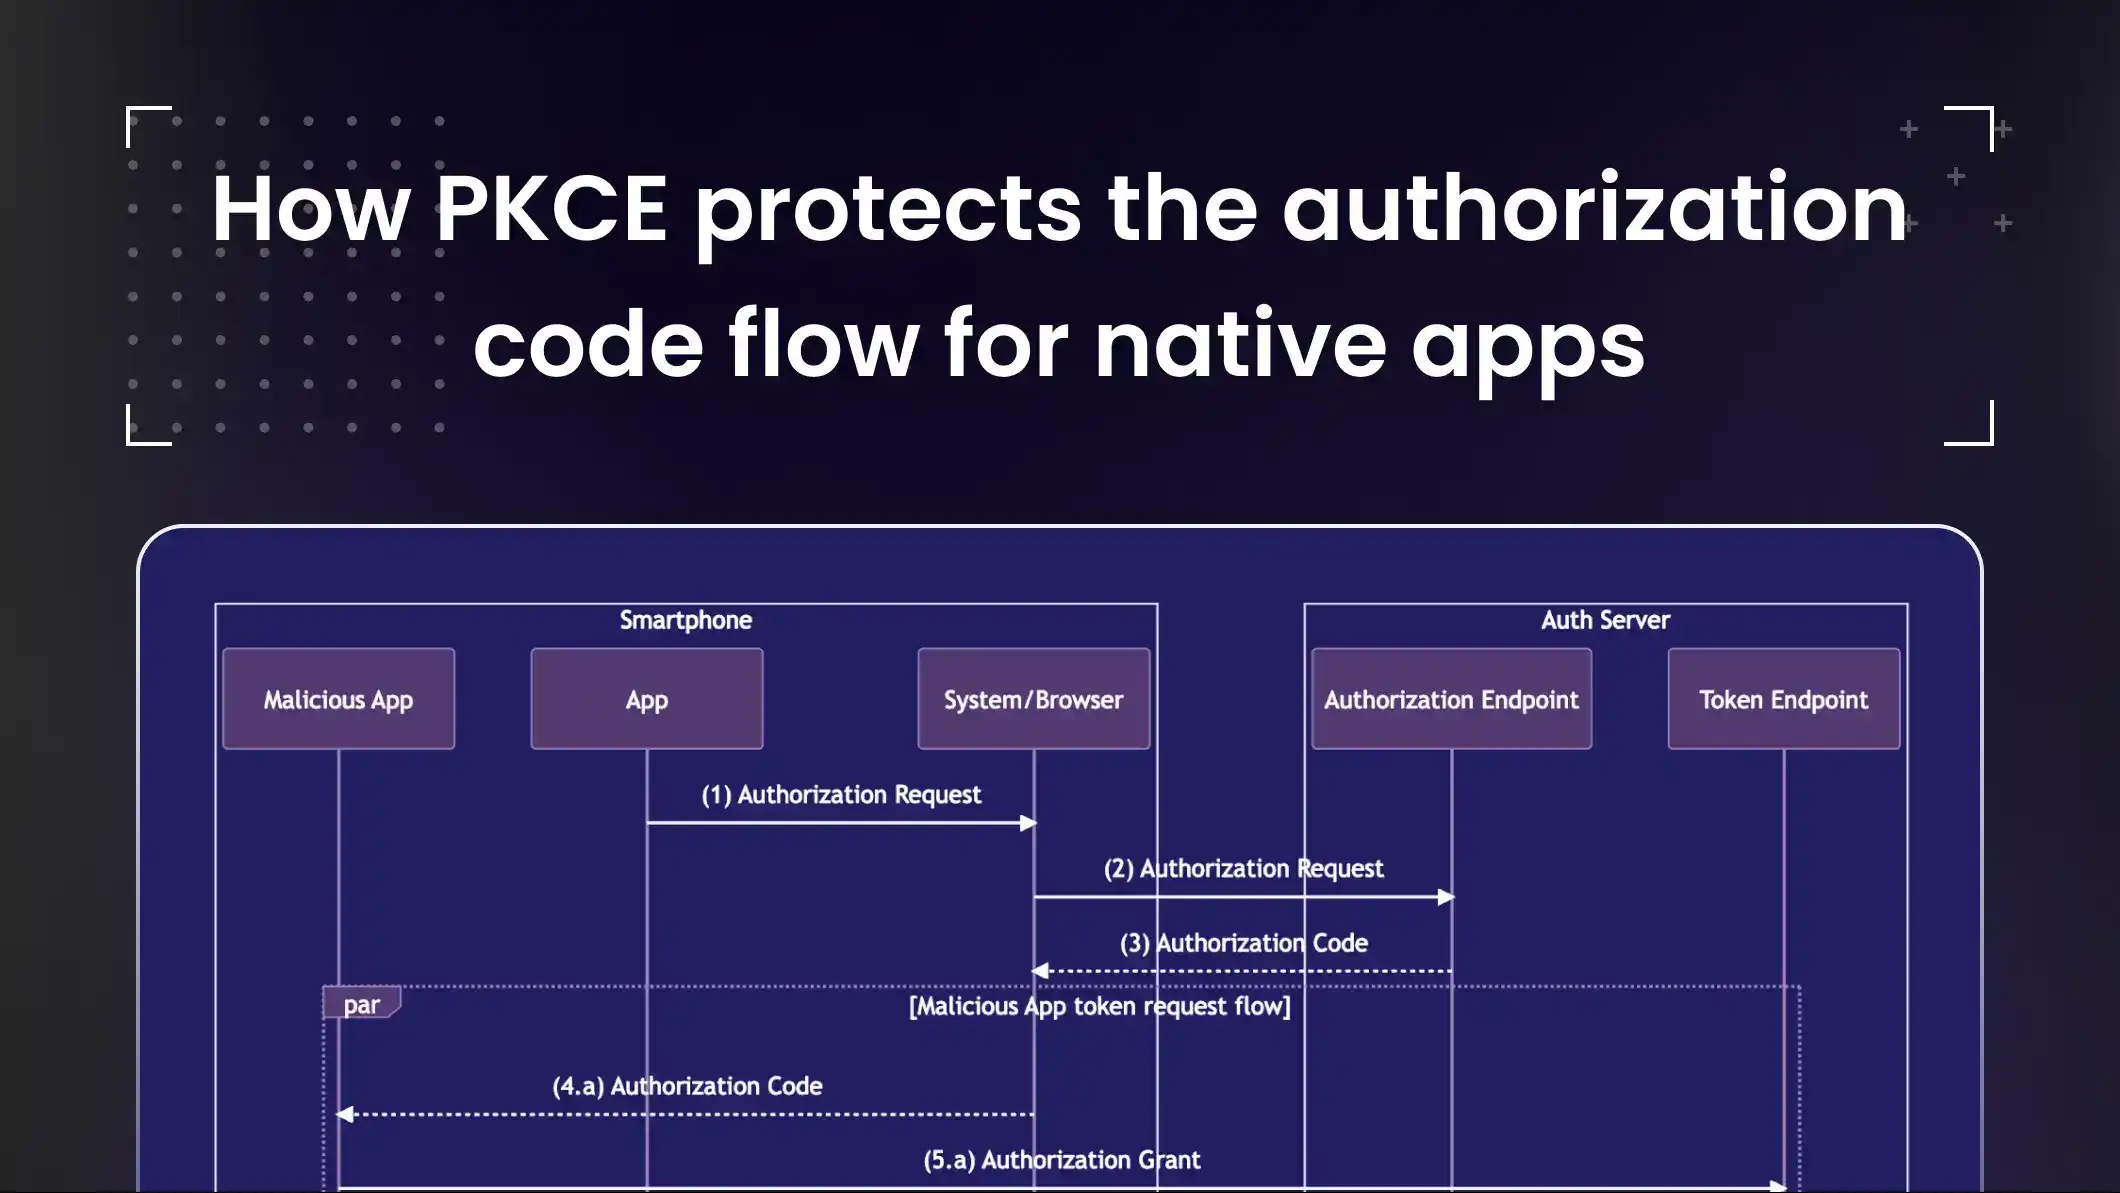 How PKCE protects the authorization code flow for native apps